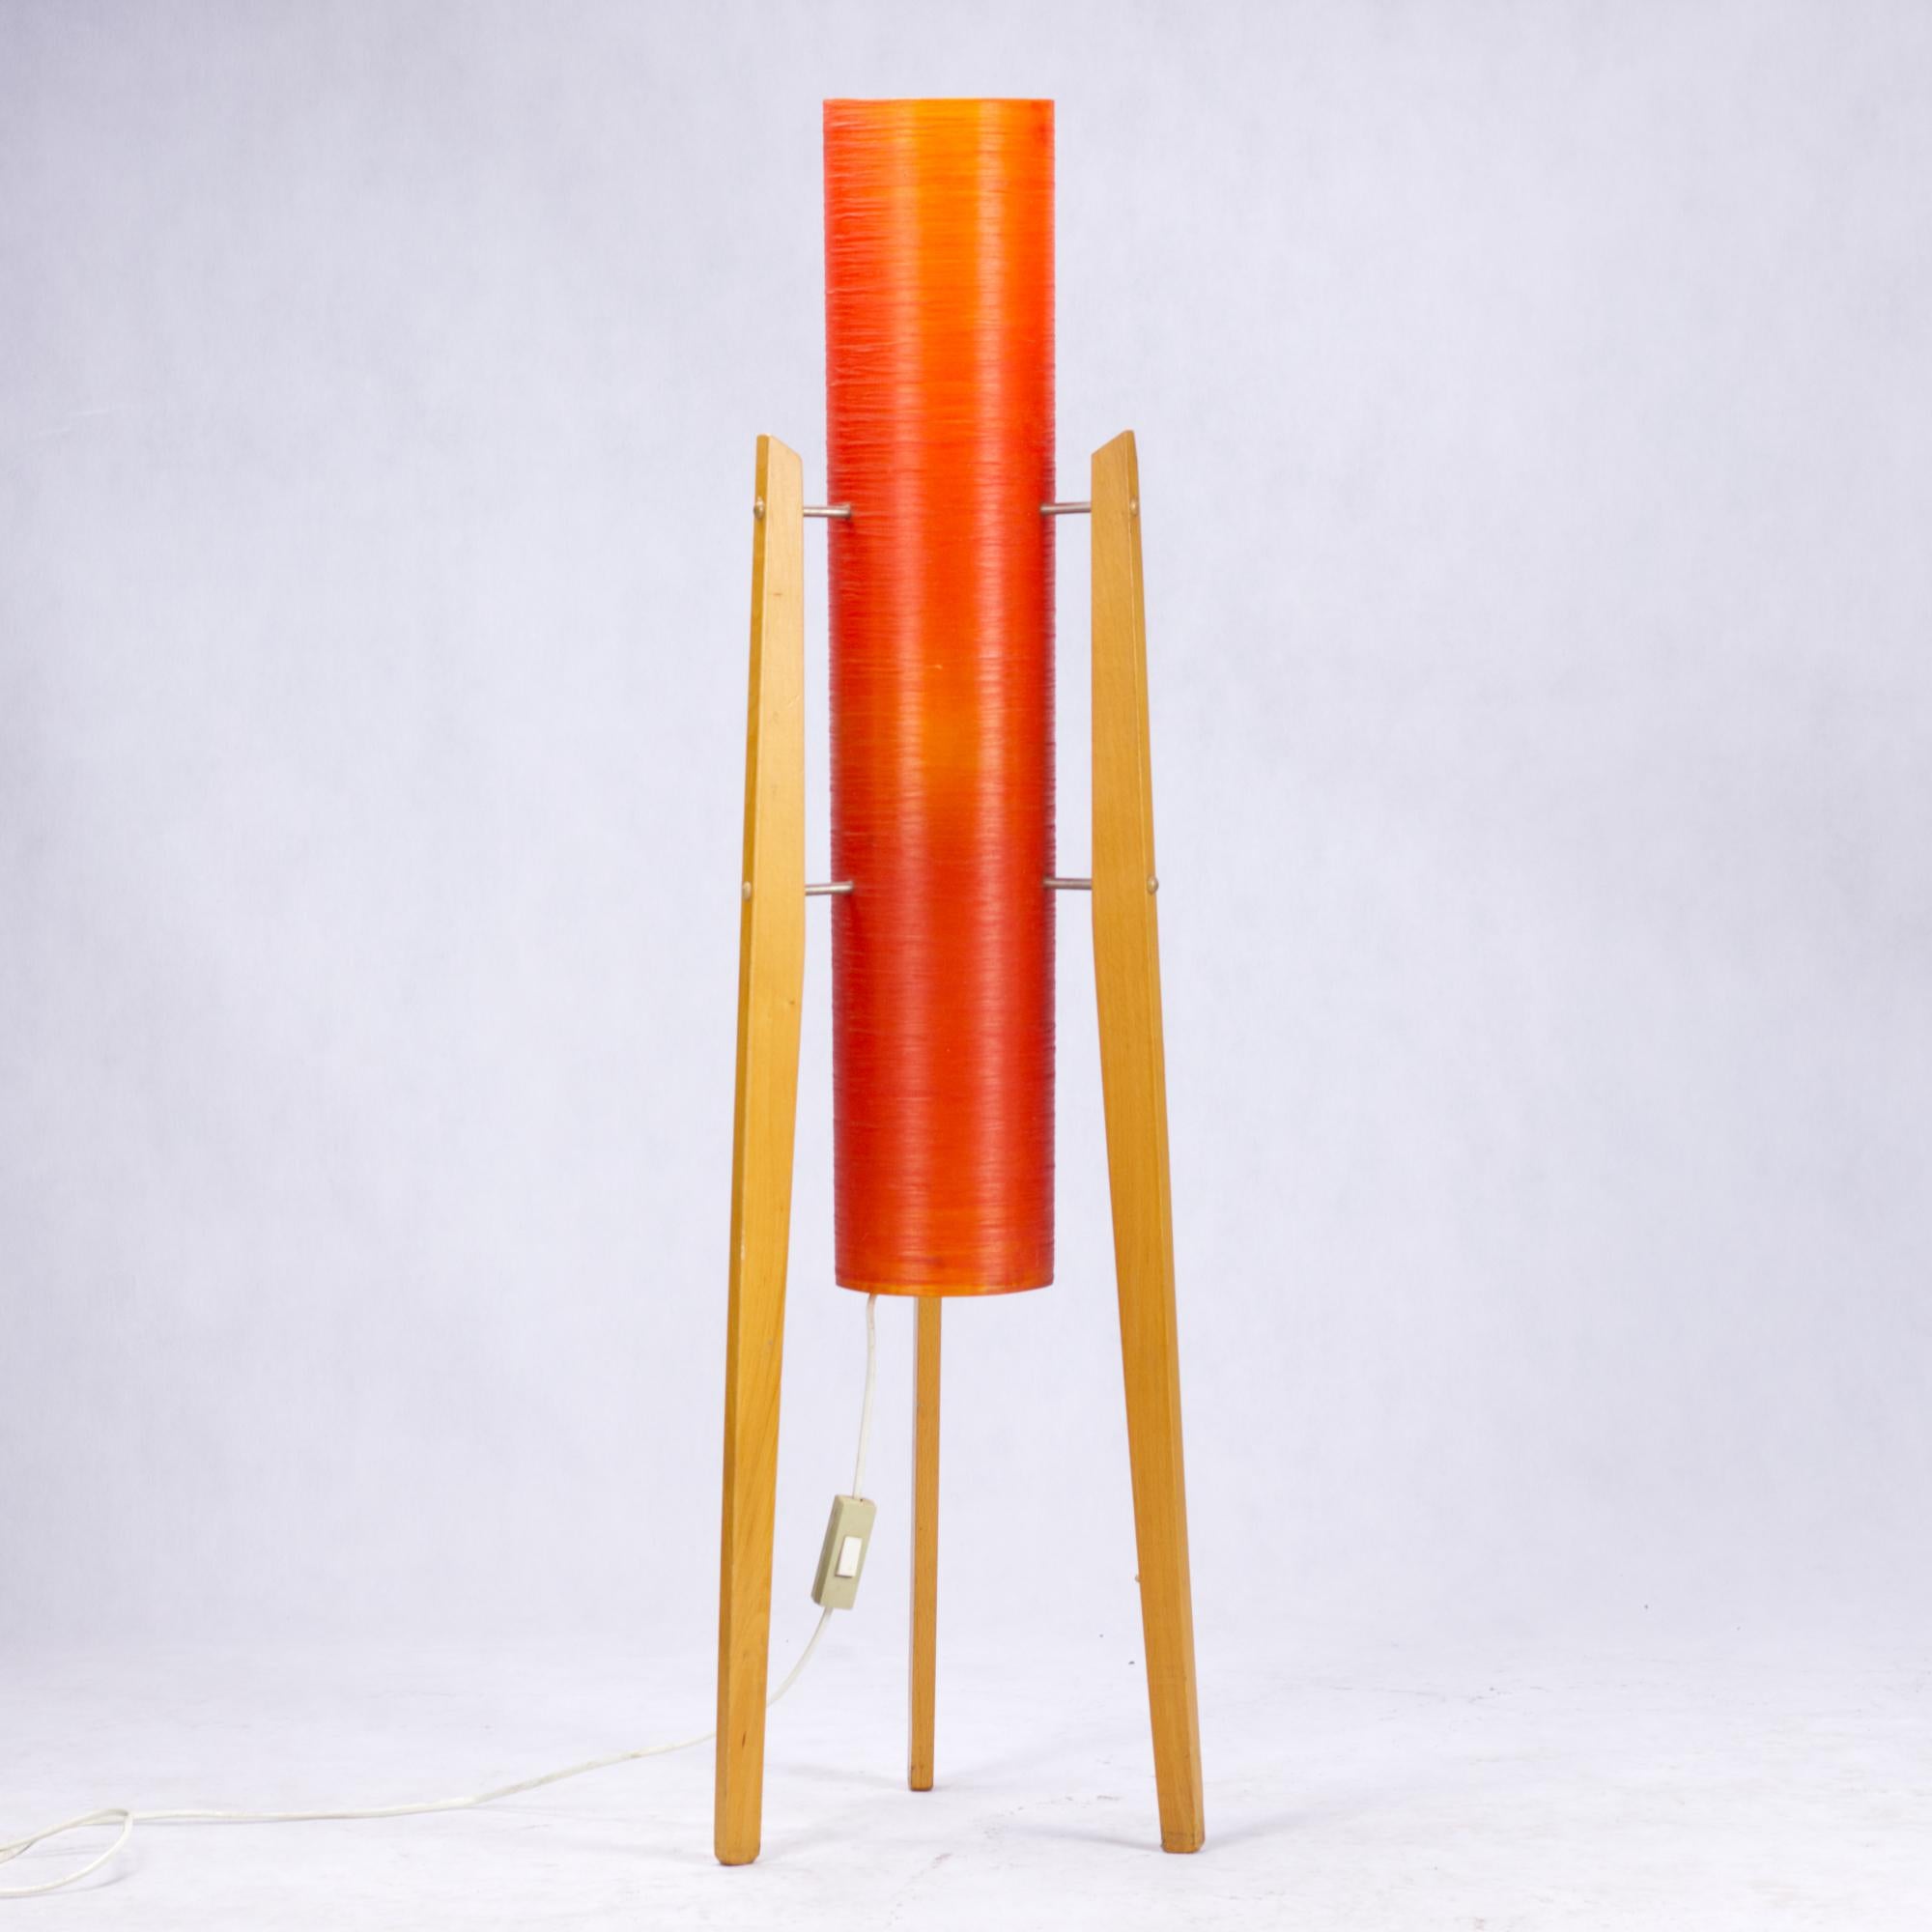 Vintage iconic rocket lamp from the 1960s.
Wooden tripod stand and orange shade made of fiberglass.
The condition is very good without structural damage.